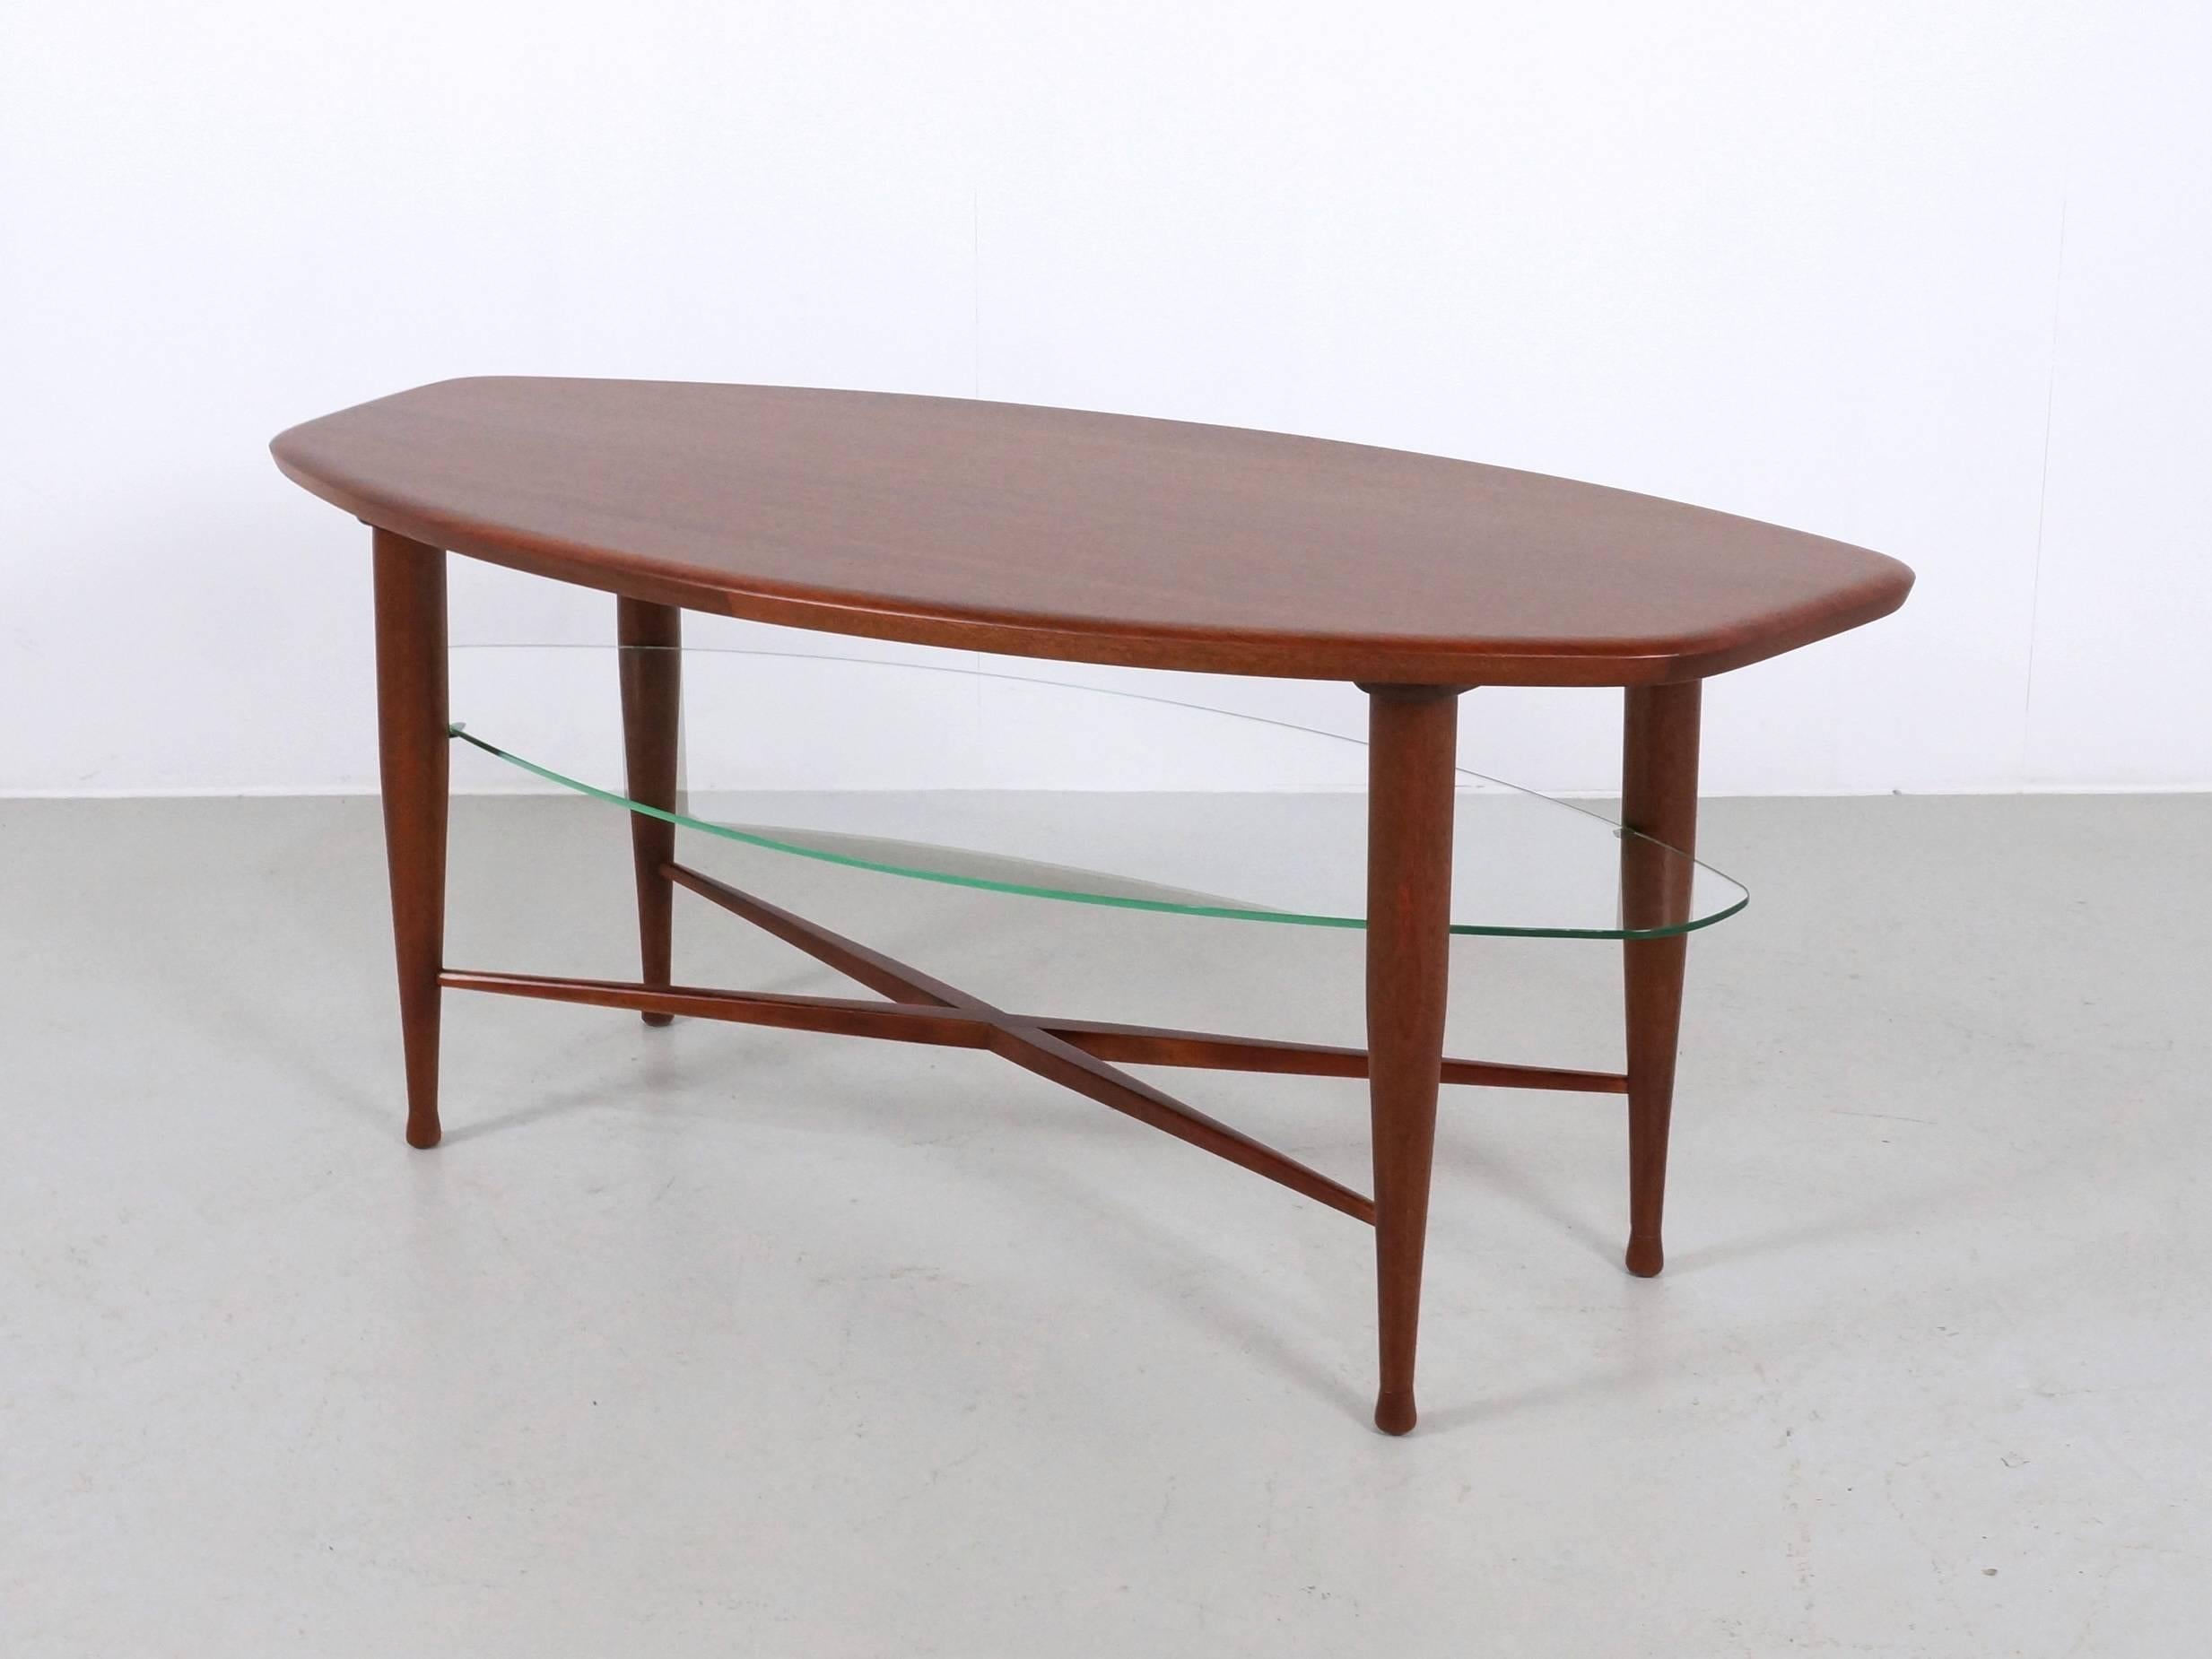 Teak Coffee Table with Glass Magazine Shelve Underneath For Sale 3